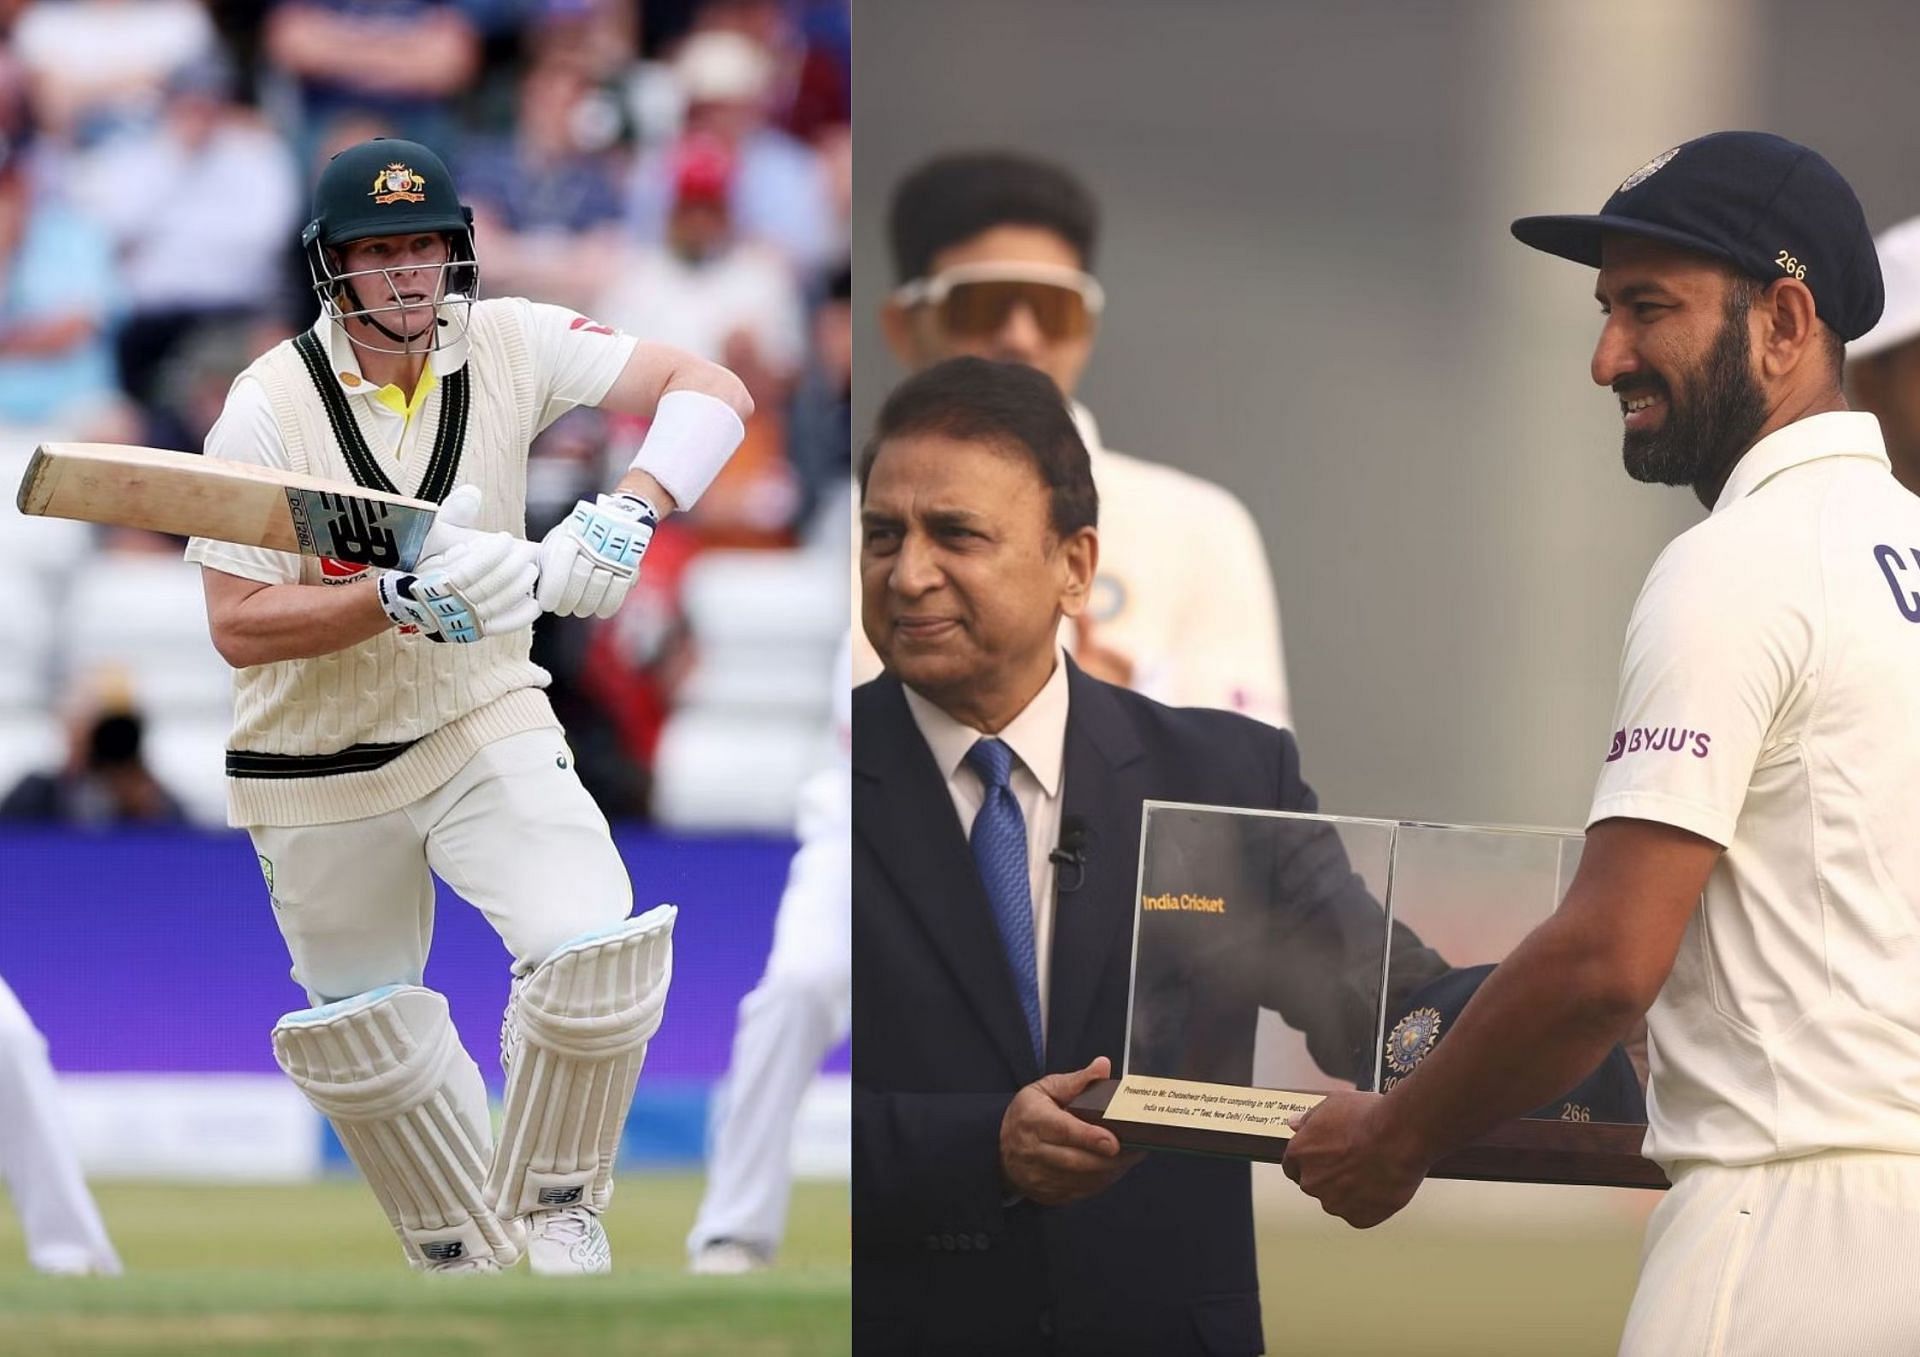 Steve Smith is currently playing his 100th Test while Cheteshwar Pujara played his earlier this year.